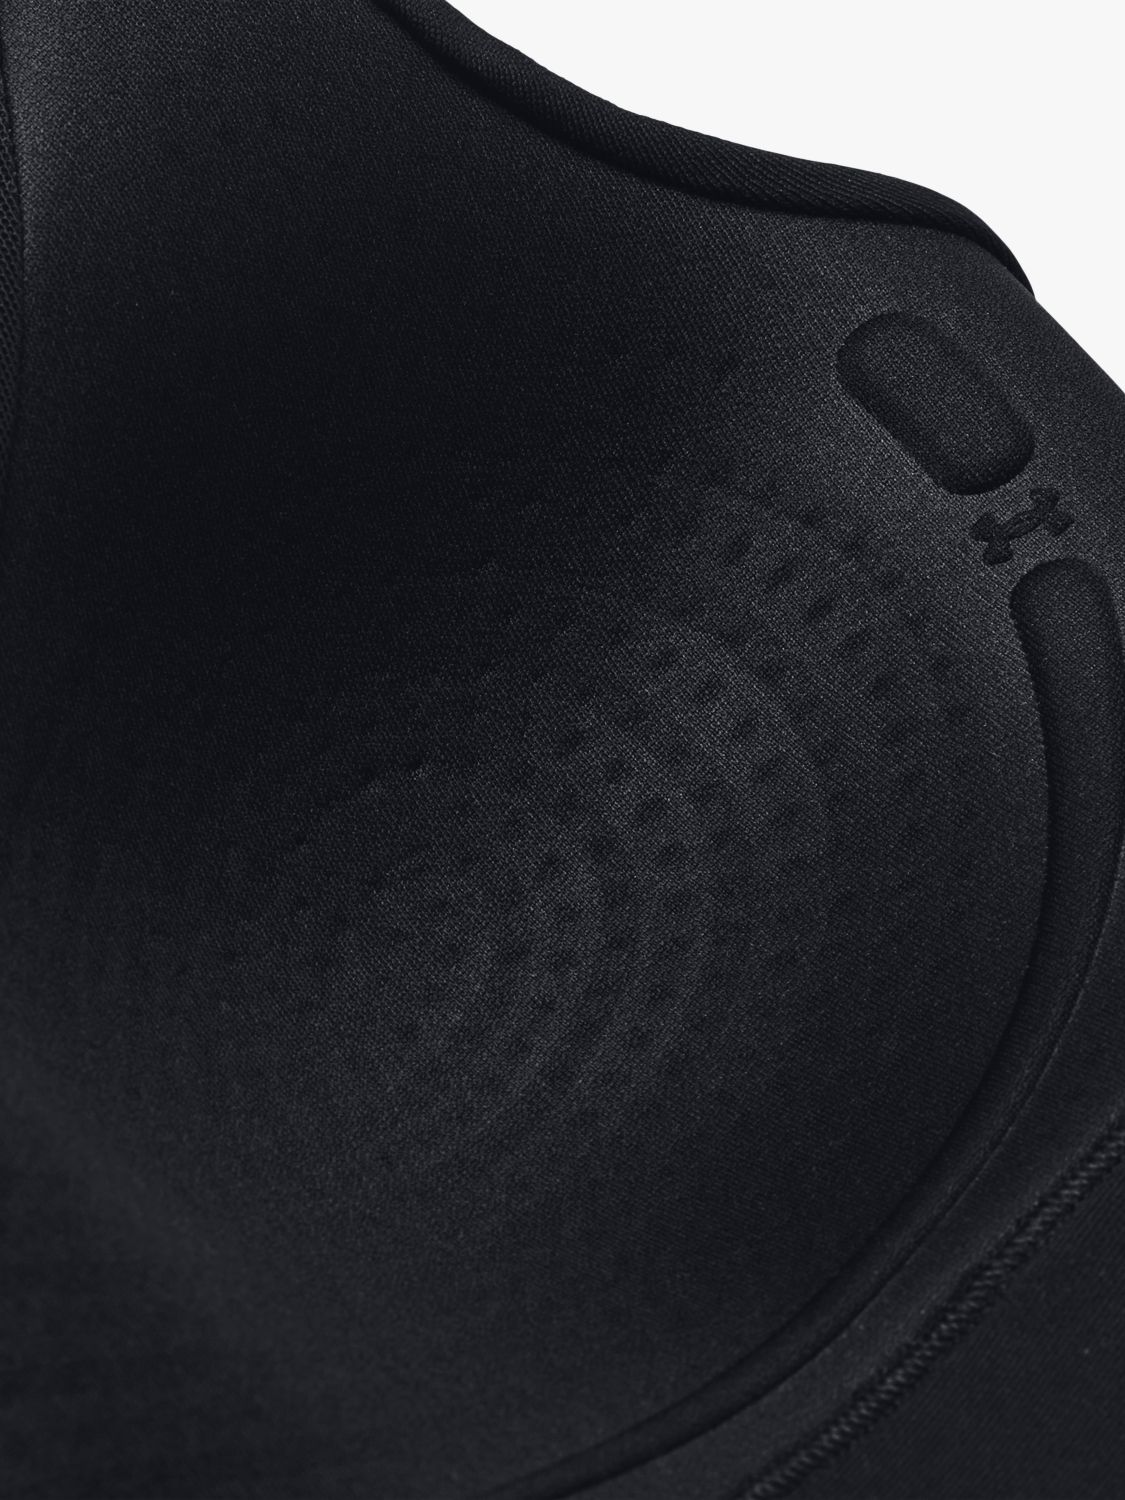 Buy Under Armour Infinity 2.0 High Support Sports Bra, Black Online at johnlewis.com